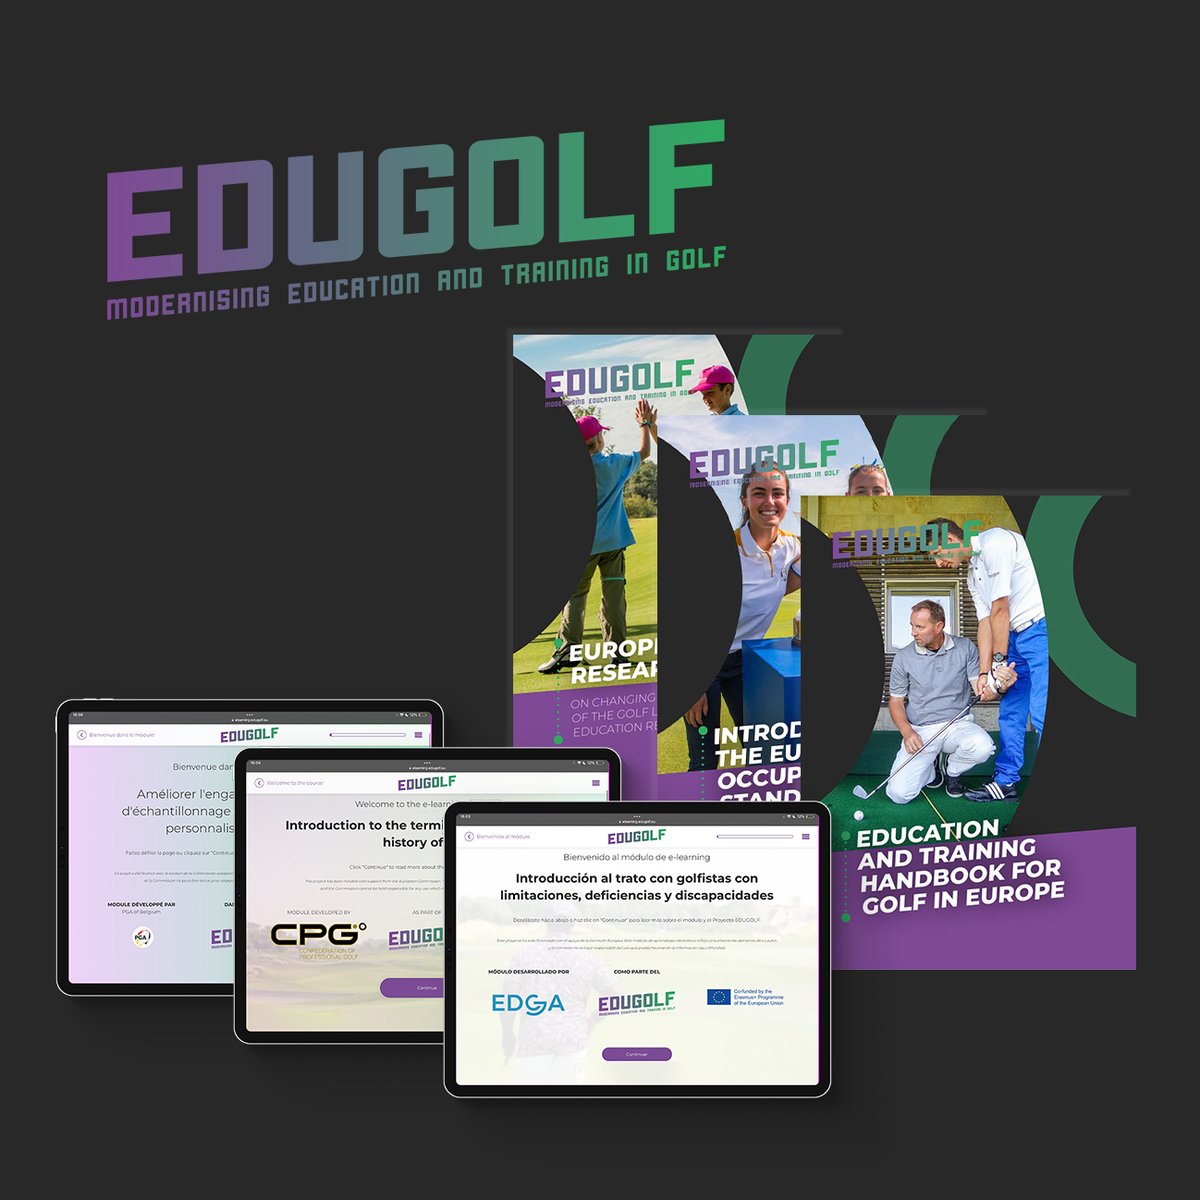 We are proud to announce the conclusion of the #EDUGOLF Project! 🇪🇺🎓 This milestone reflects 3 years of incredible collaboration, research and innovation, aiming to revolutionise golf education across Europe. More at cp.golf/3PRbOEL & outputs at edugolf.eu/outputs